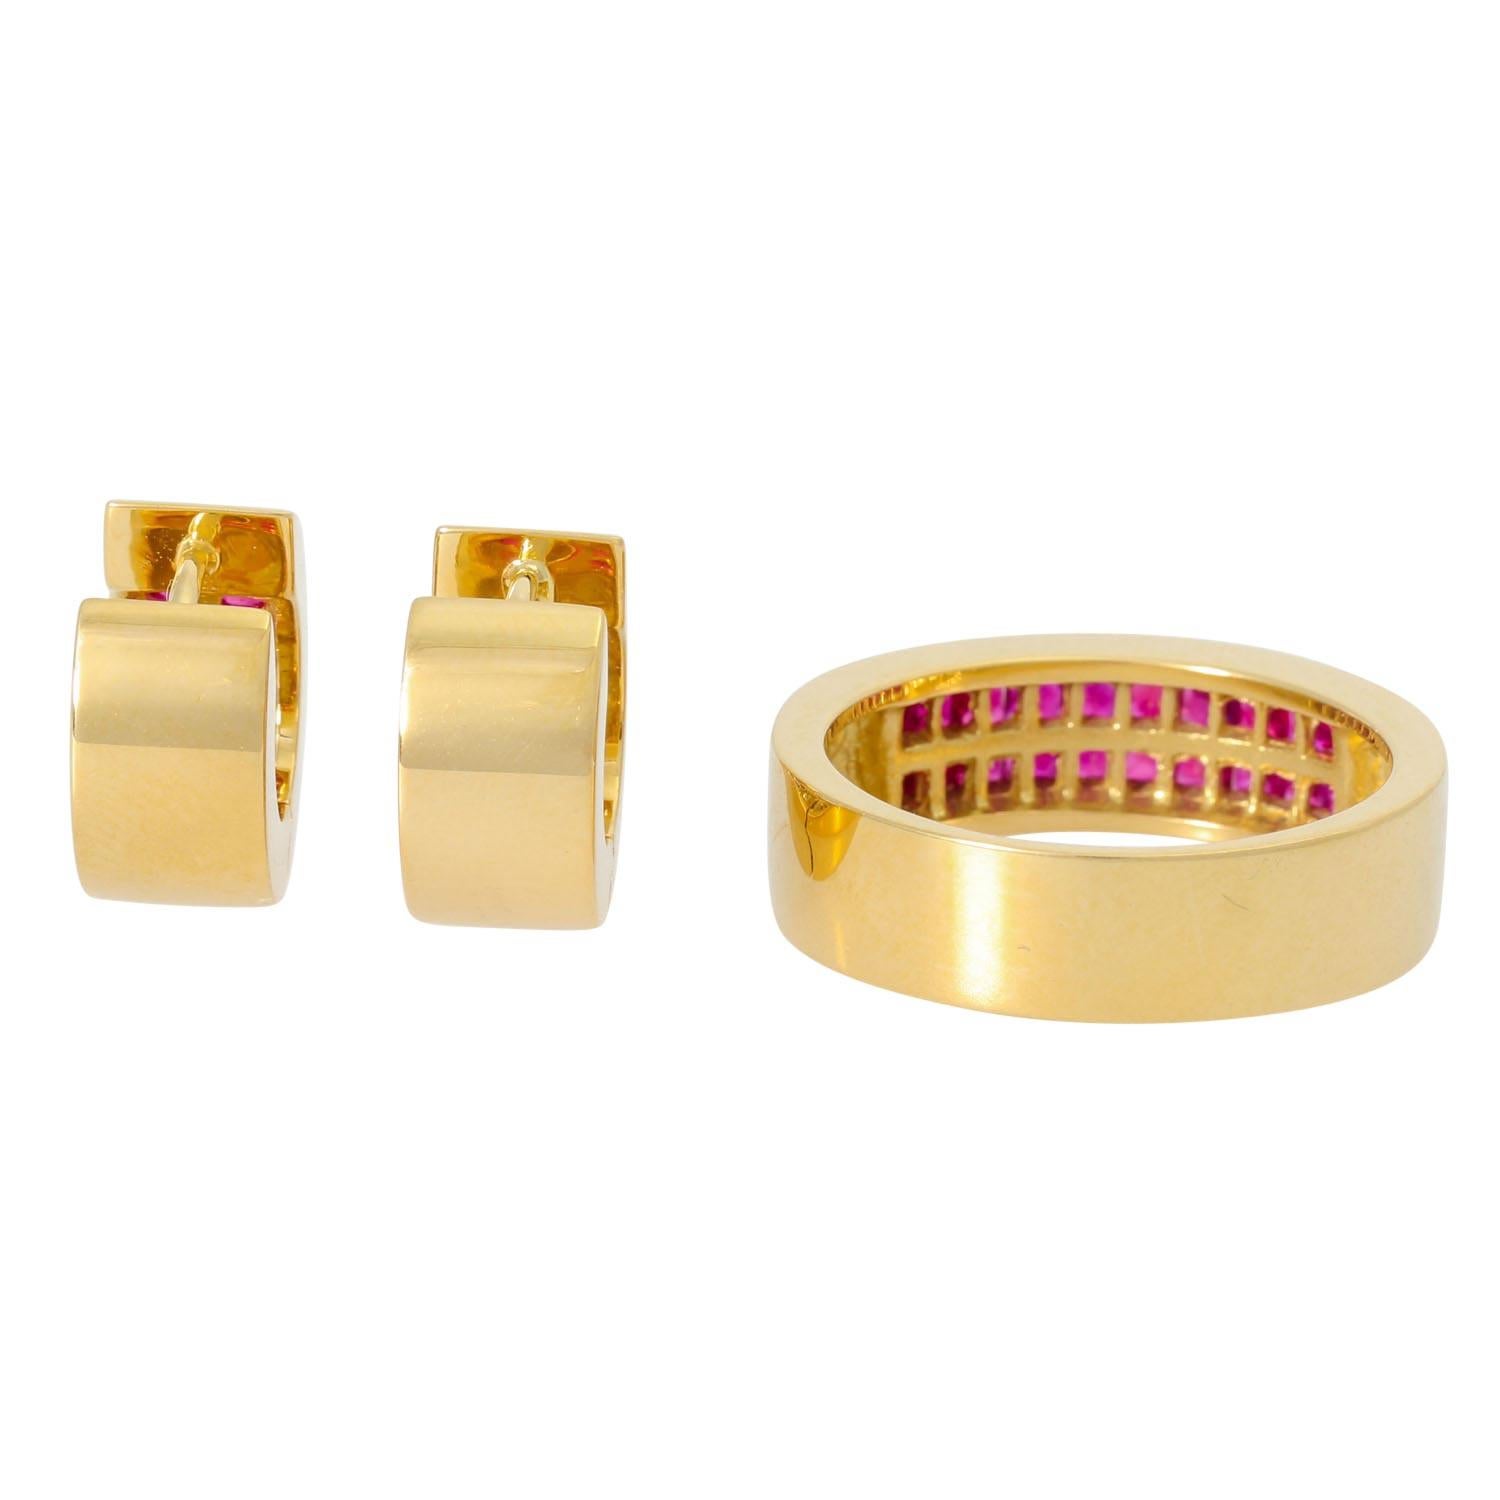 GG 18K, 17,7 g, RW: 57, Klappcreolen D: 13 mm, 20./21. Jh., neuwertig.

 Jewellery set ring and earrings with carré-cut rubies, 18K yellow gold, 17.7 g, ring size 57, earrings D: 13 mm, 20th/21st century, mint condition.